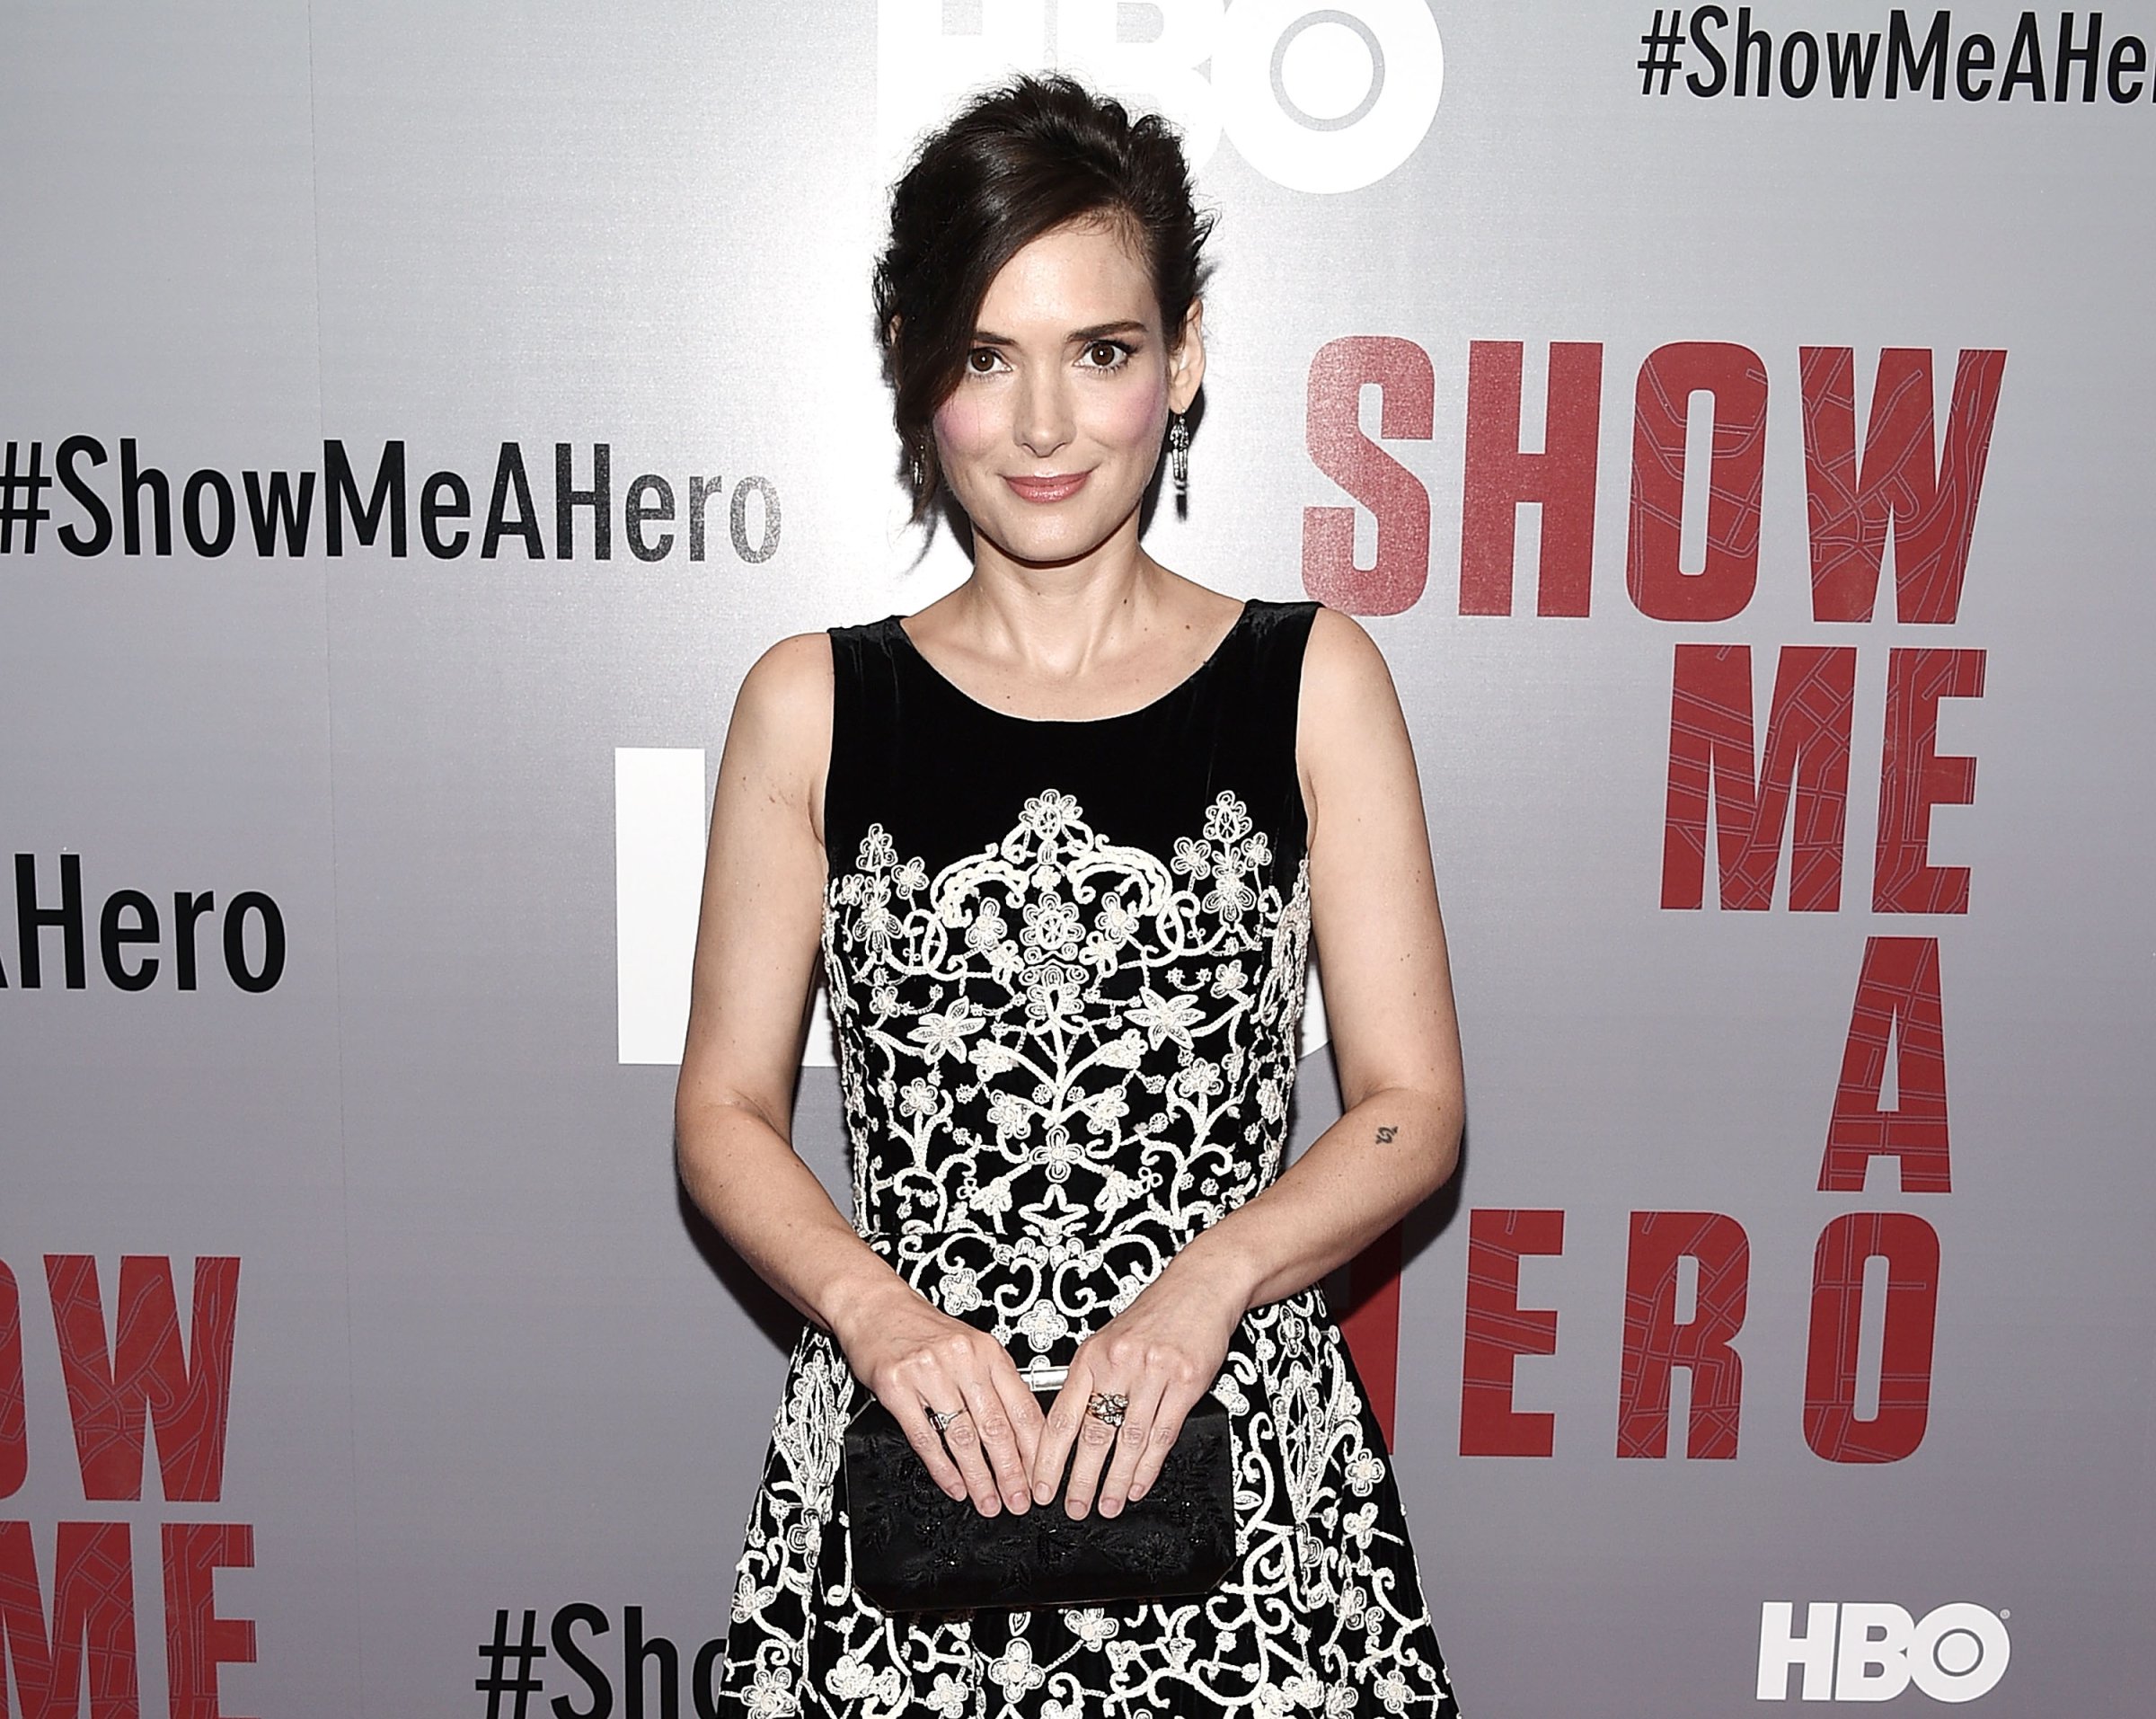 Actress Winona Ryder attends the "Show Me A Hero" New York screening at The New York Times Center on August 11, 2015 in New York City.